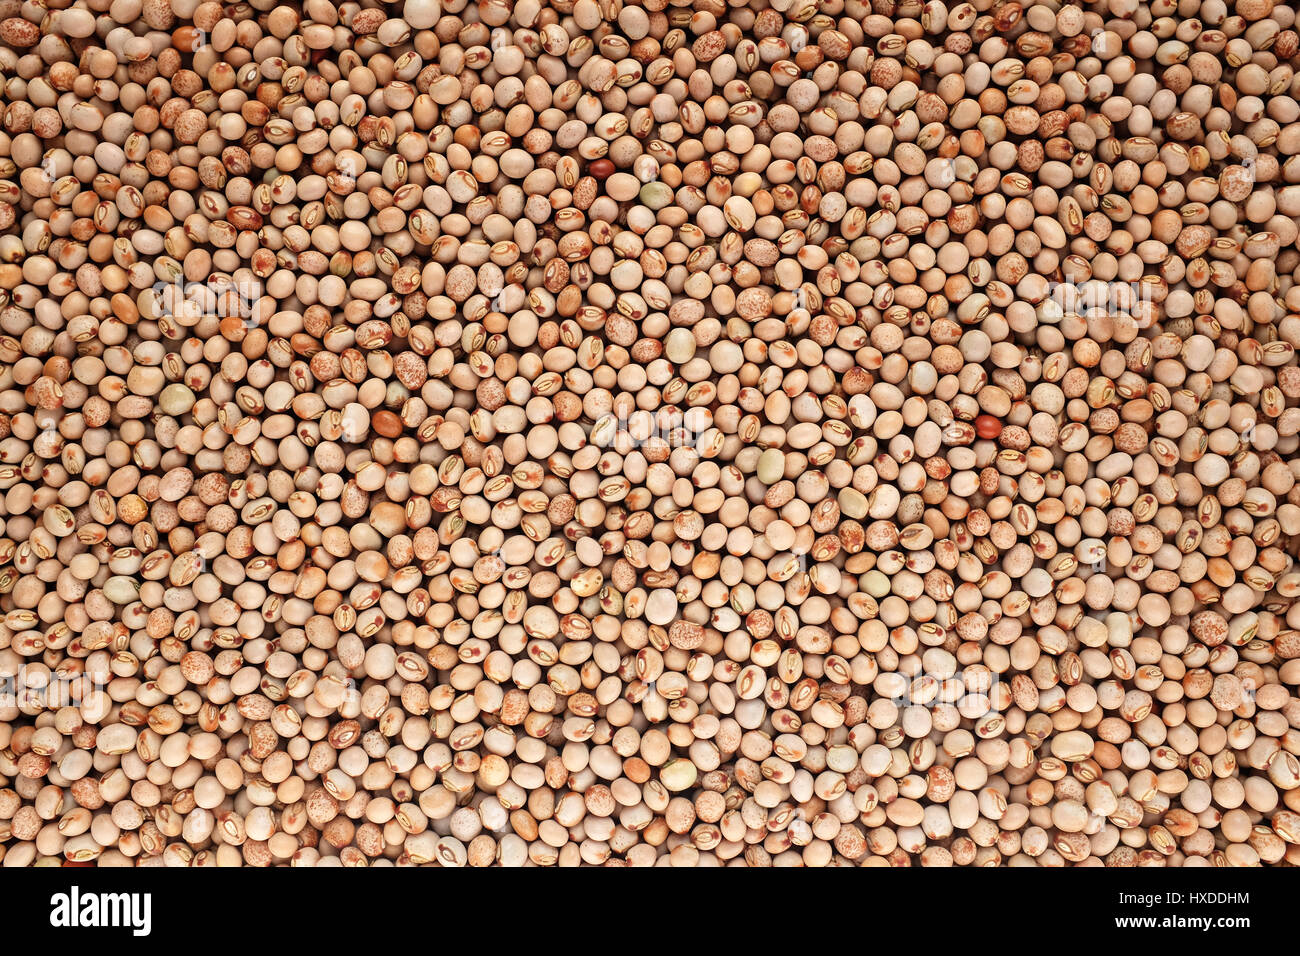 Dried pigeon peas as an abstract background texture Stock Photo